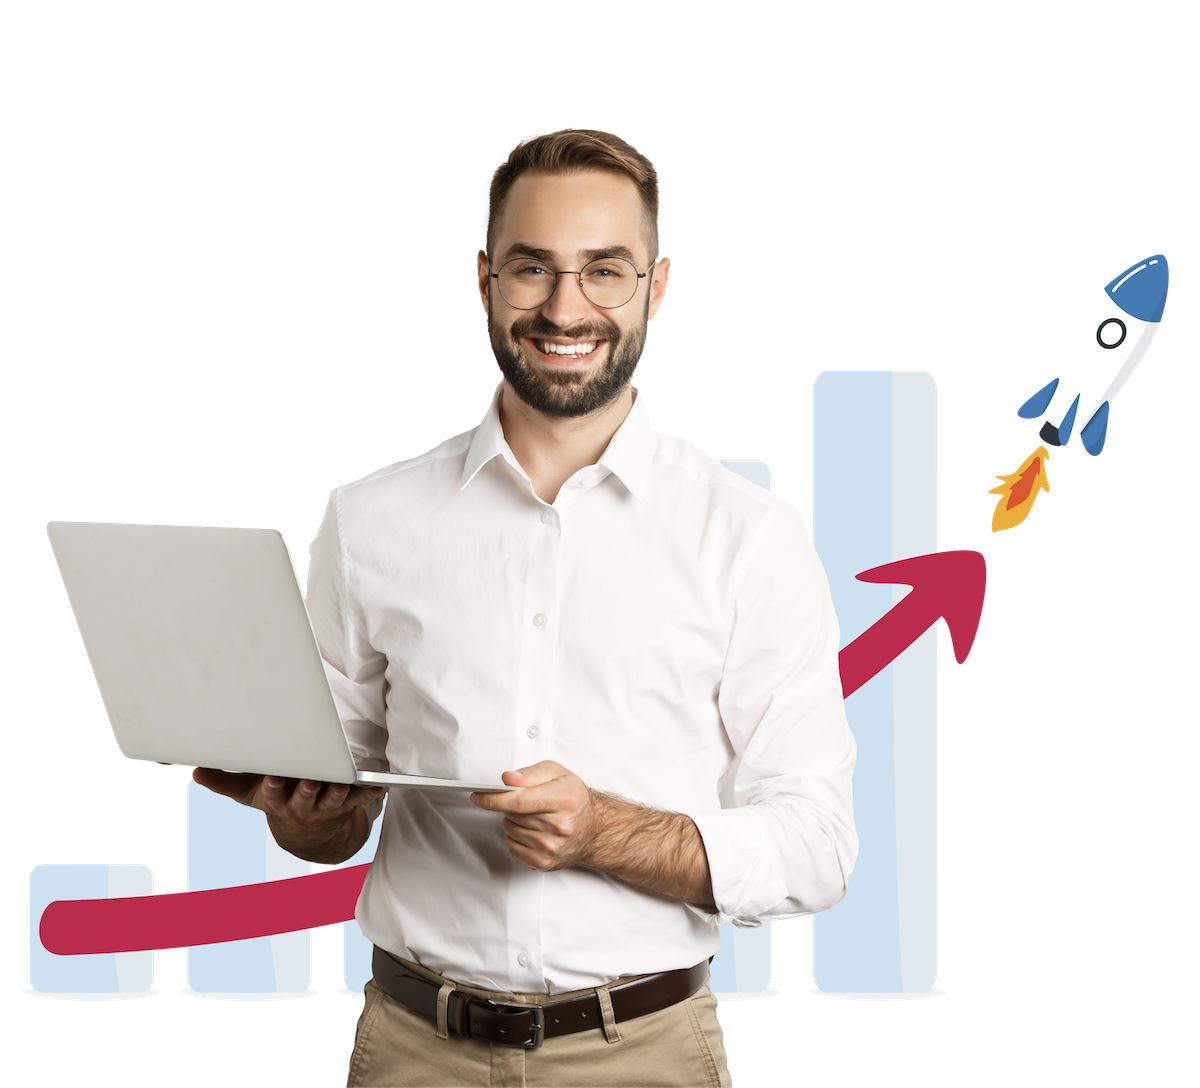 happy man holding laptop with upward trending chart and launching shuttle behind